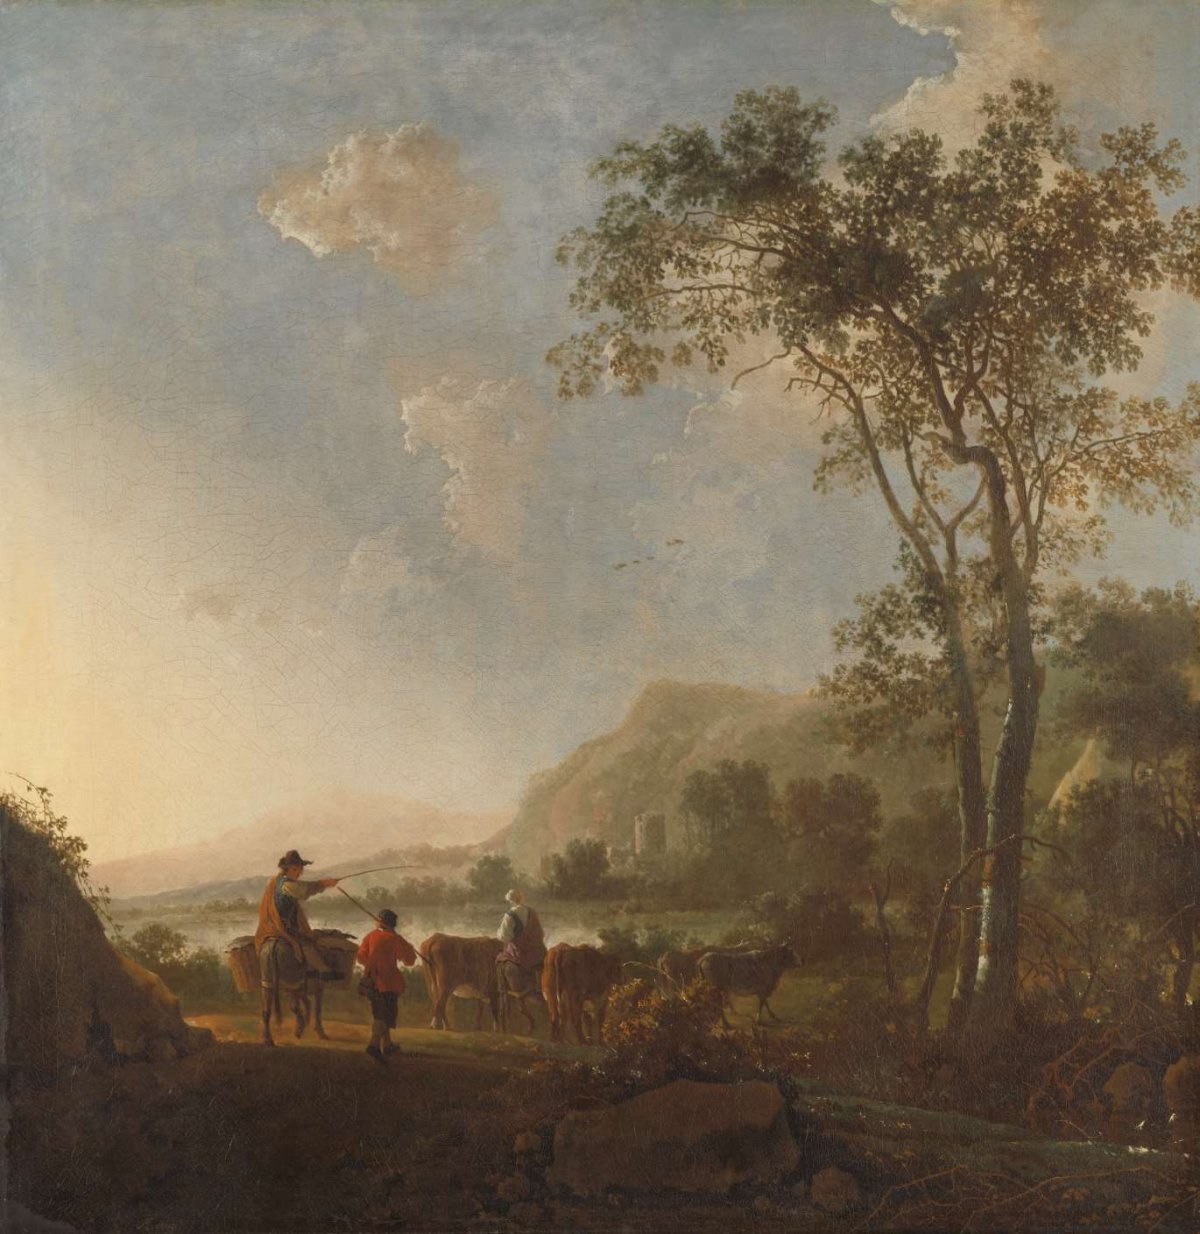 Landscape with Herdsmen and Cattle, Aelbert Cuyp, c. 1660 - c. 1795